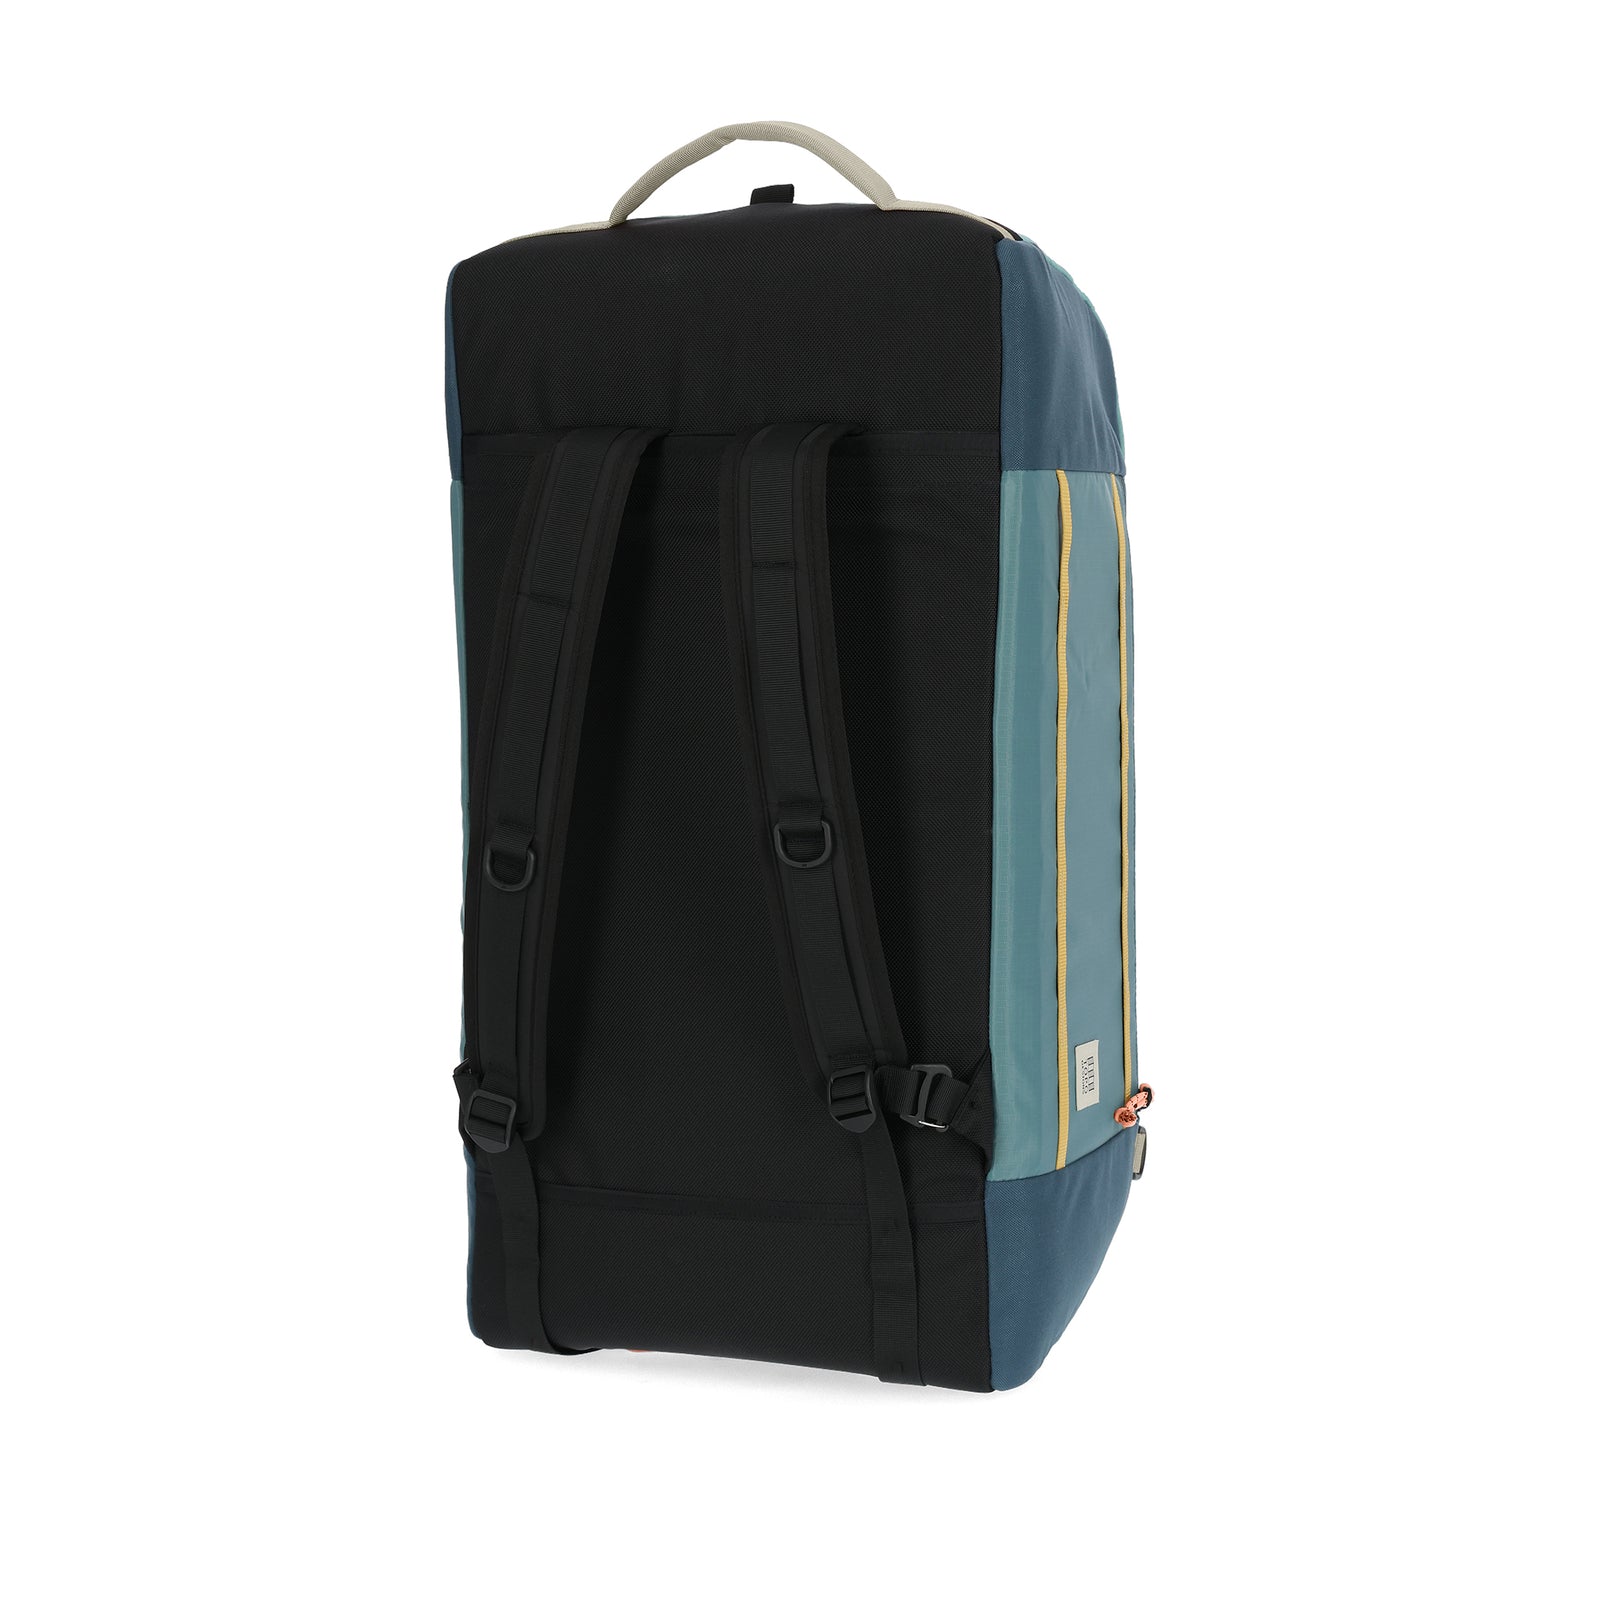 Back View of Topo Designs Mountain Duffel 70L in "Geode Green / Sea Pine"